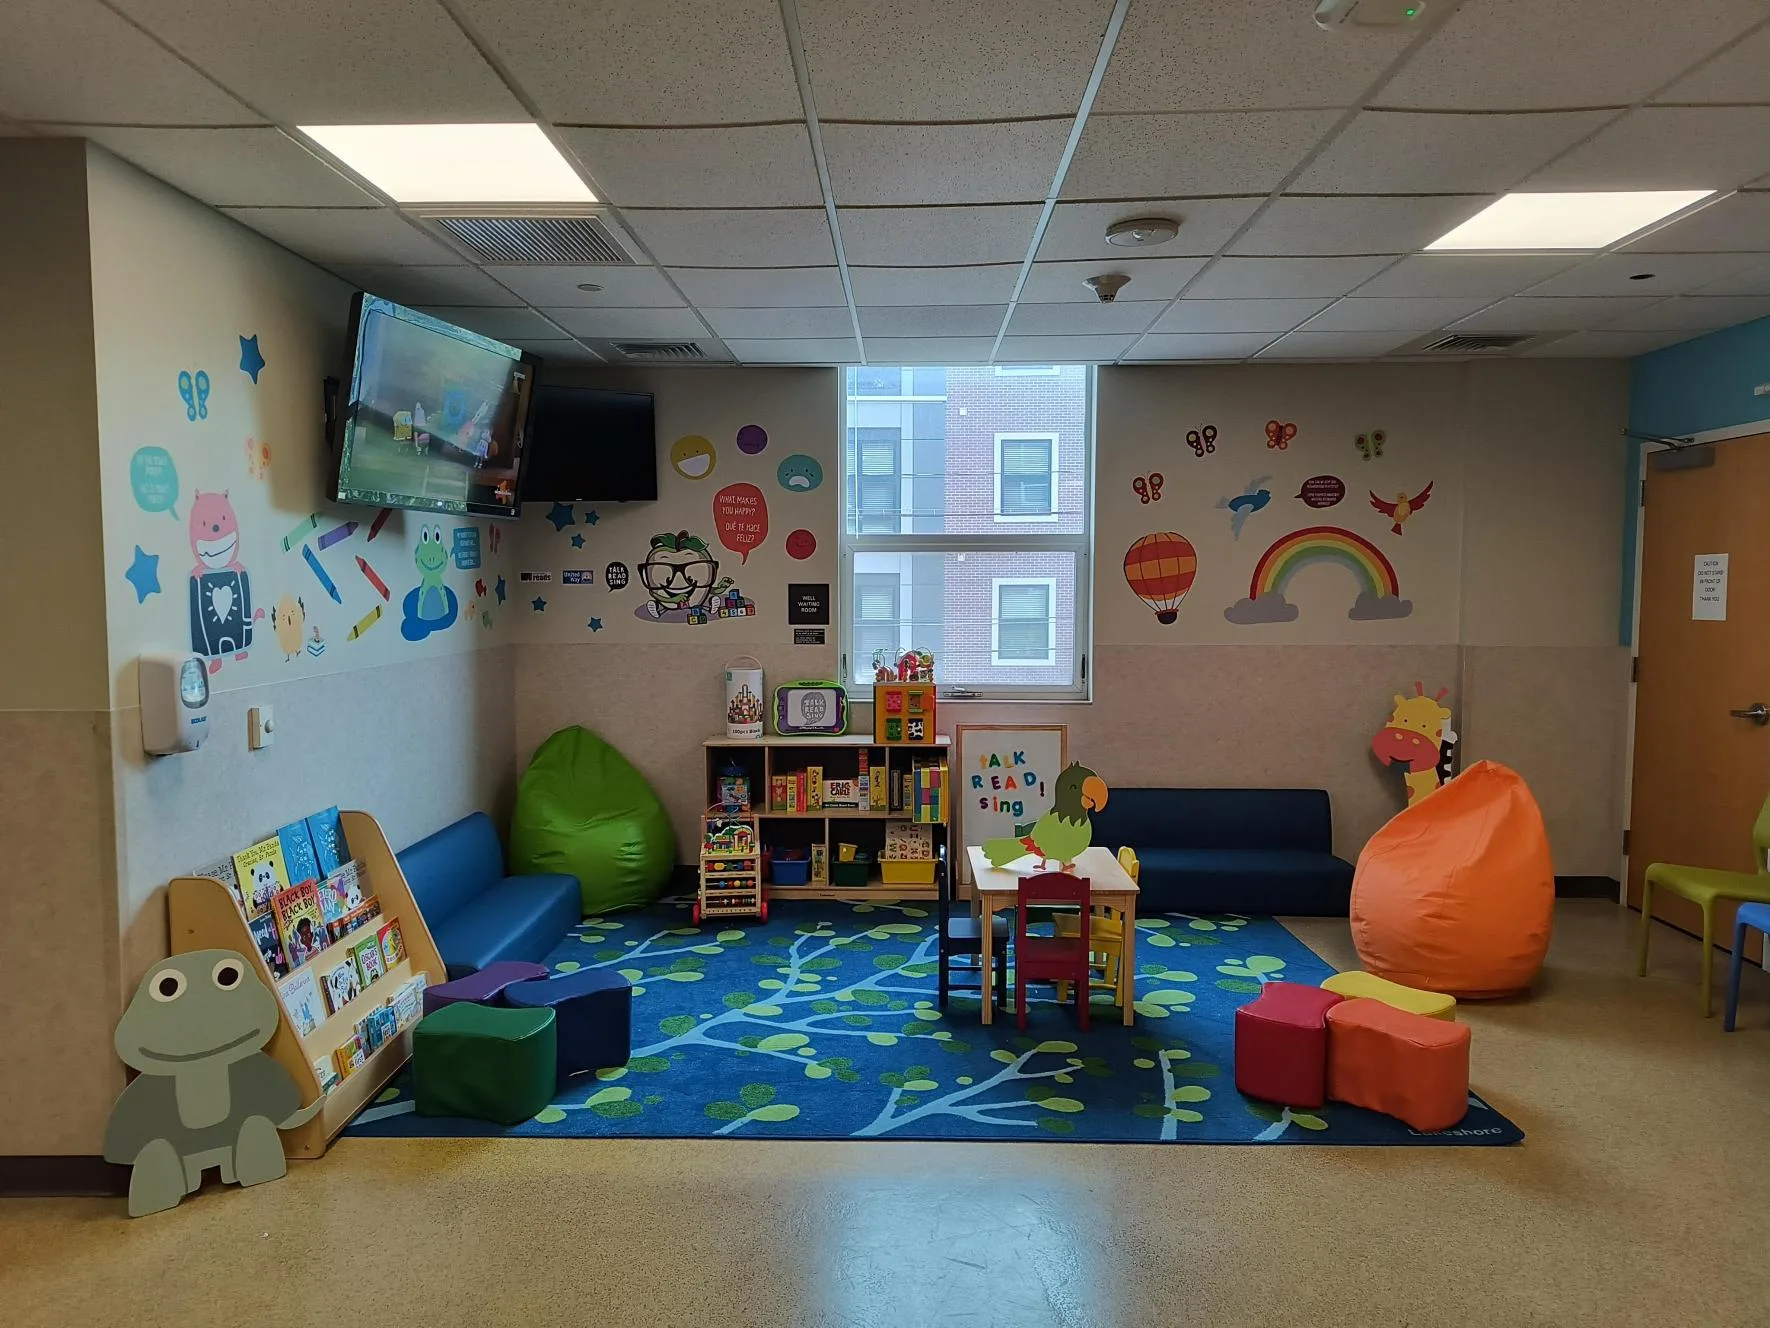 Talk Read Sing is empowering families with engaging environments that foster learning in community spaces.